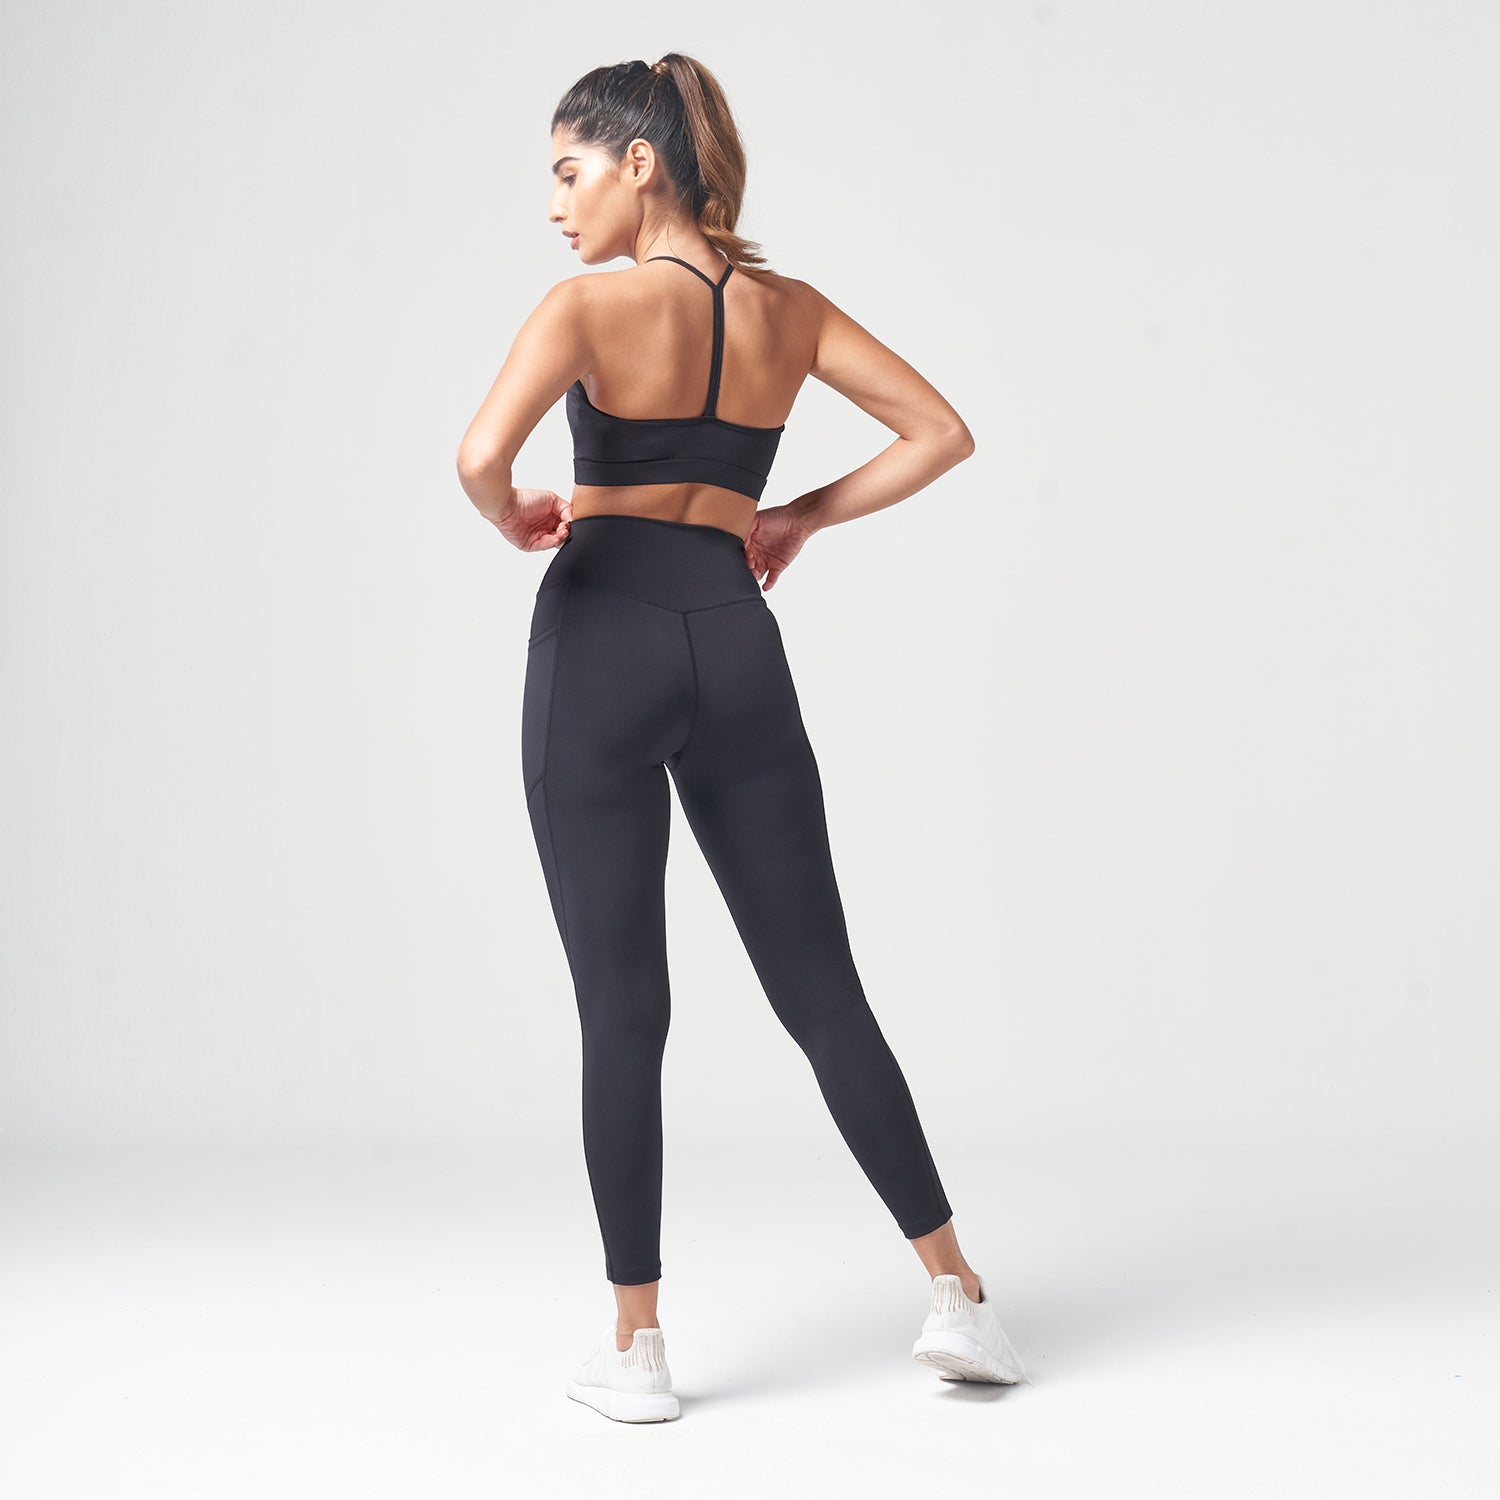 Domyos Women's Cropped Fitness Leggings - Black (XS / W26 L28) : Amazon.in:  Clothing & Accessories